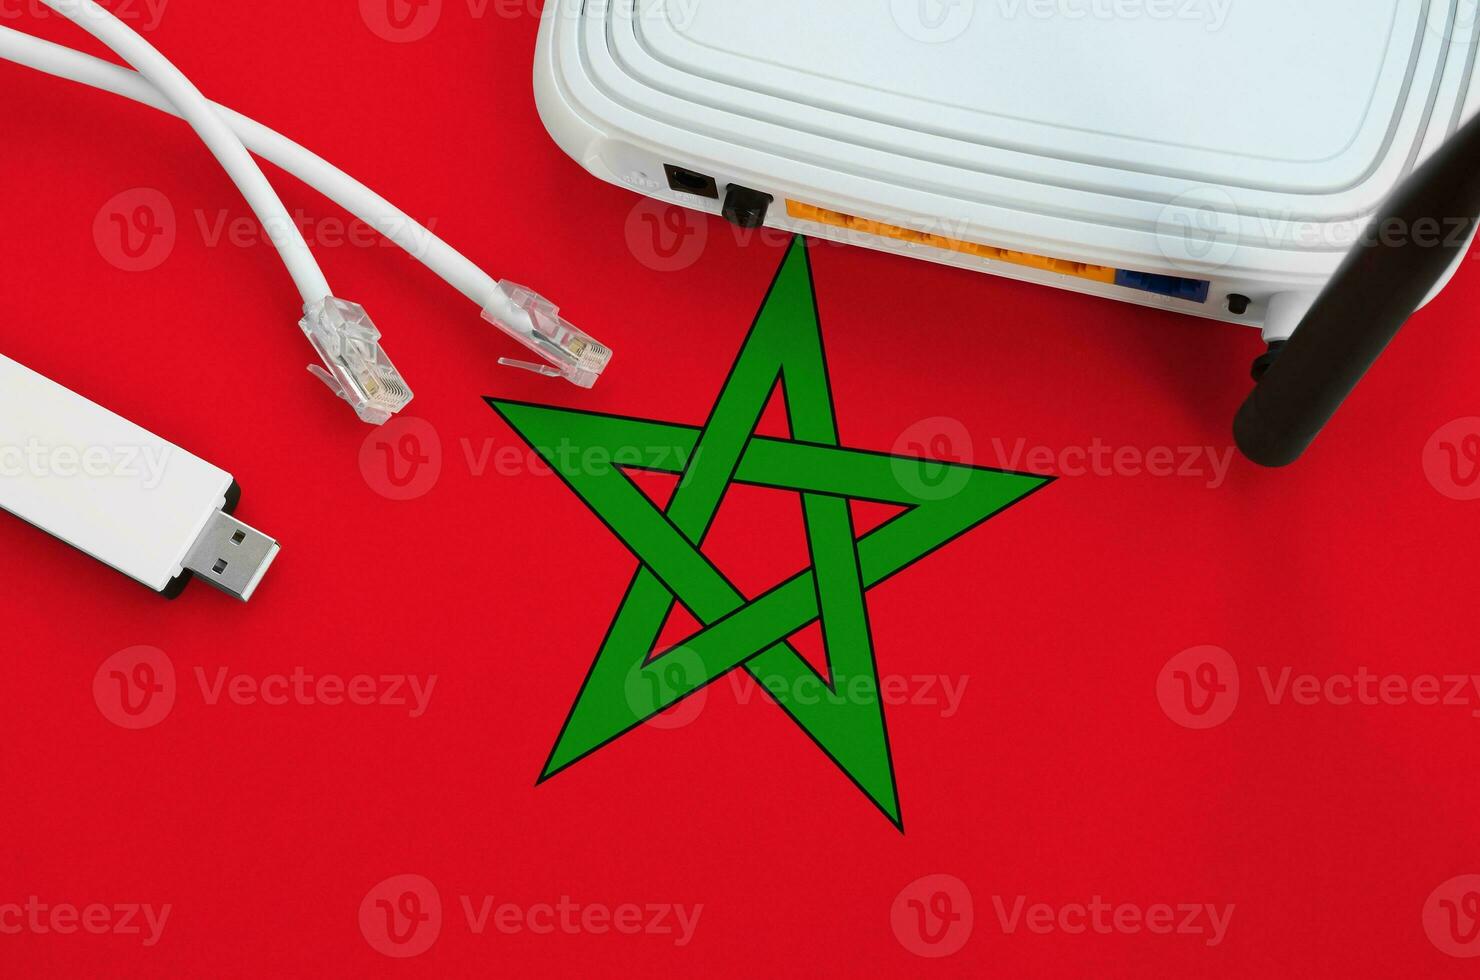 Morocco flag depicted on table with internet rj45 cable, wireless usb wifi adapter and router. Internet connection concept photo